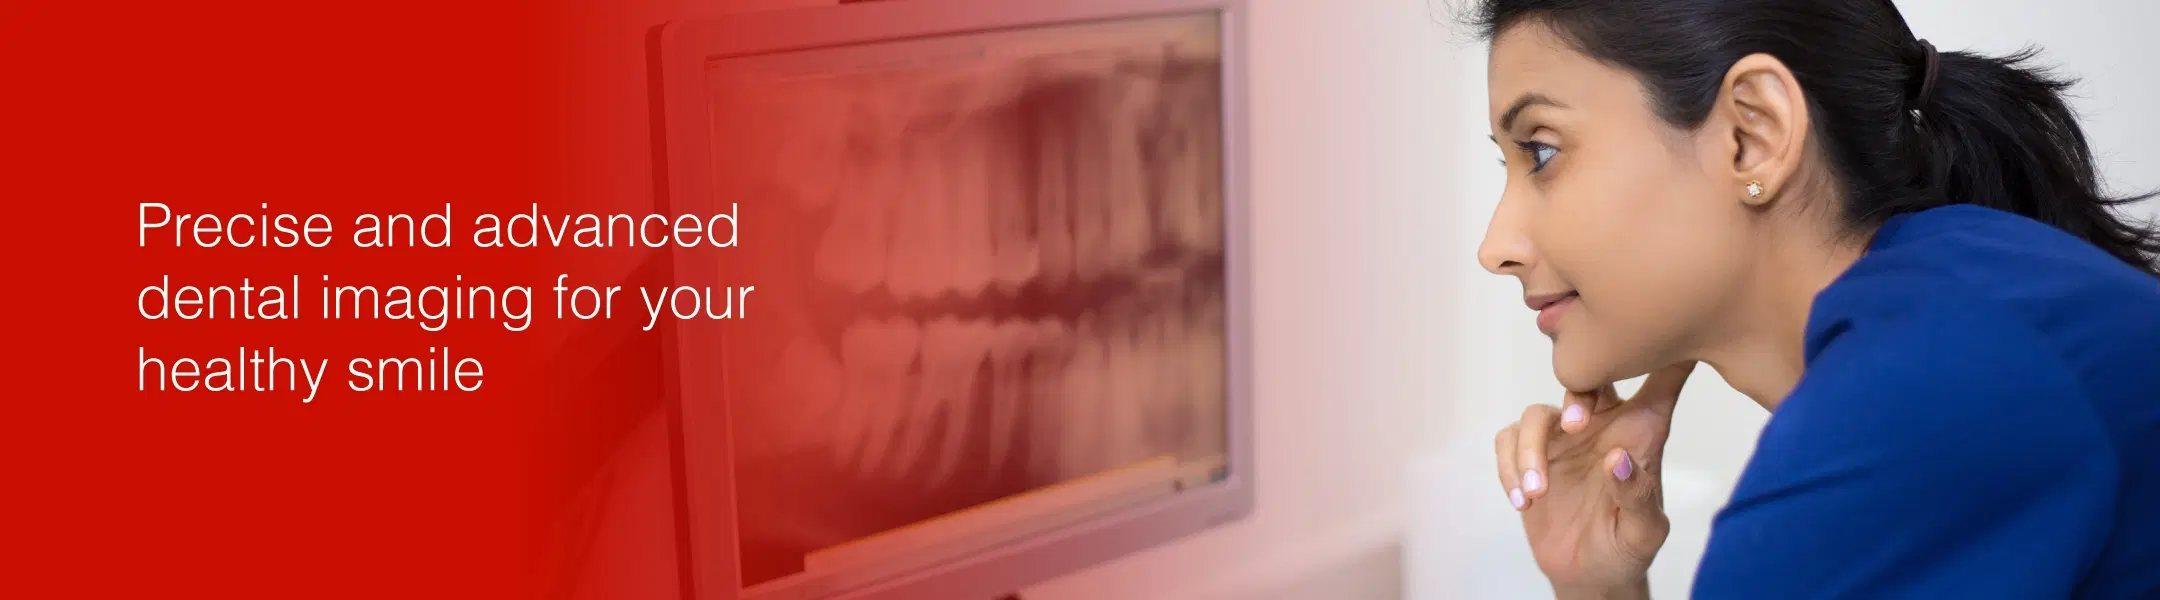 Dental - CBCT and OPG